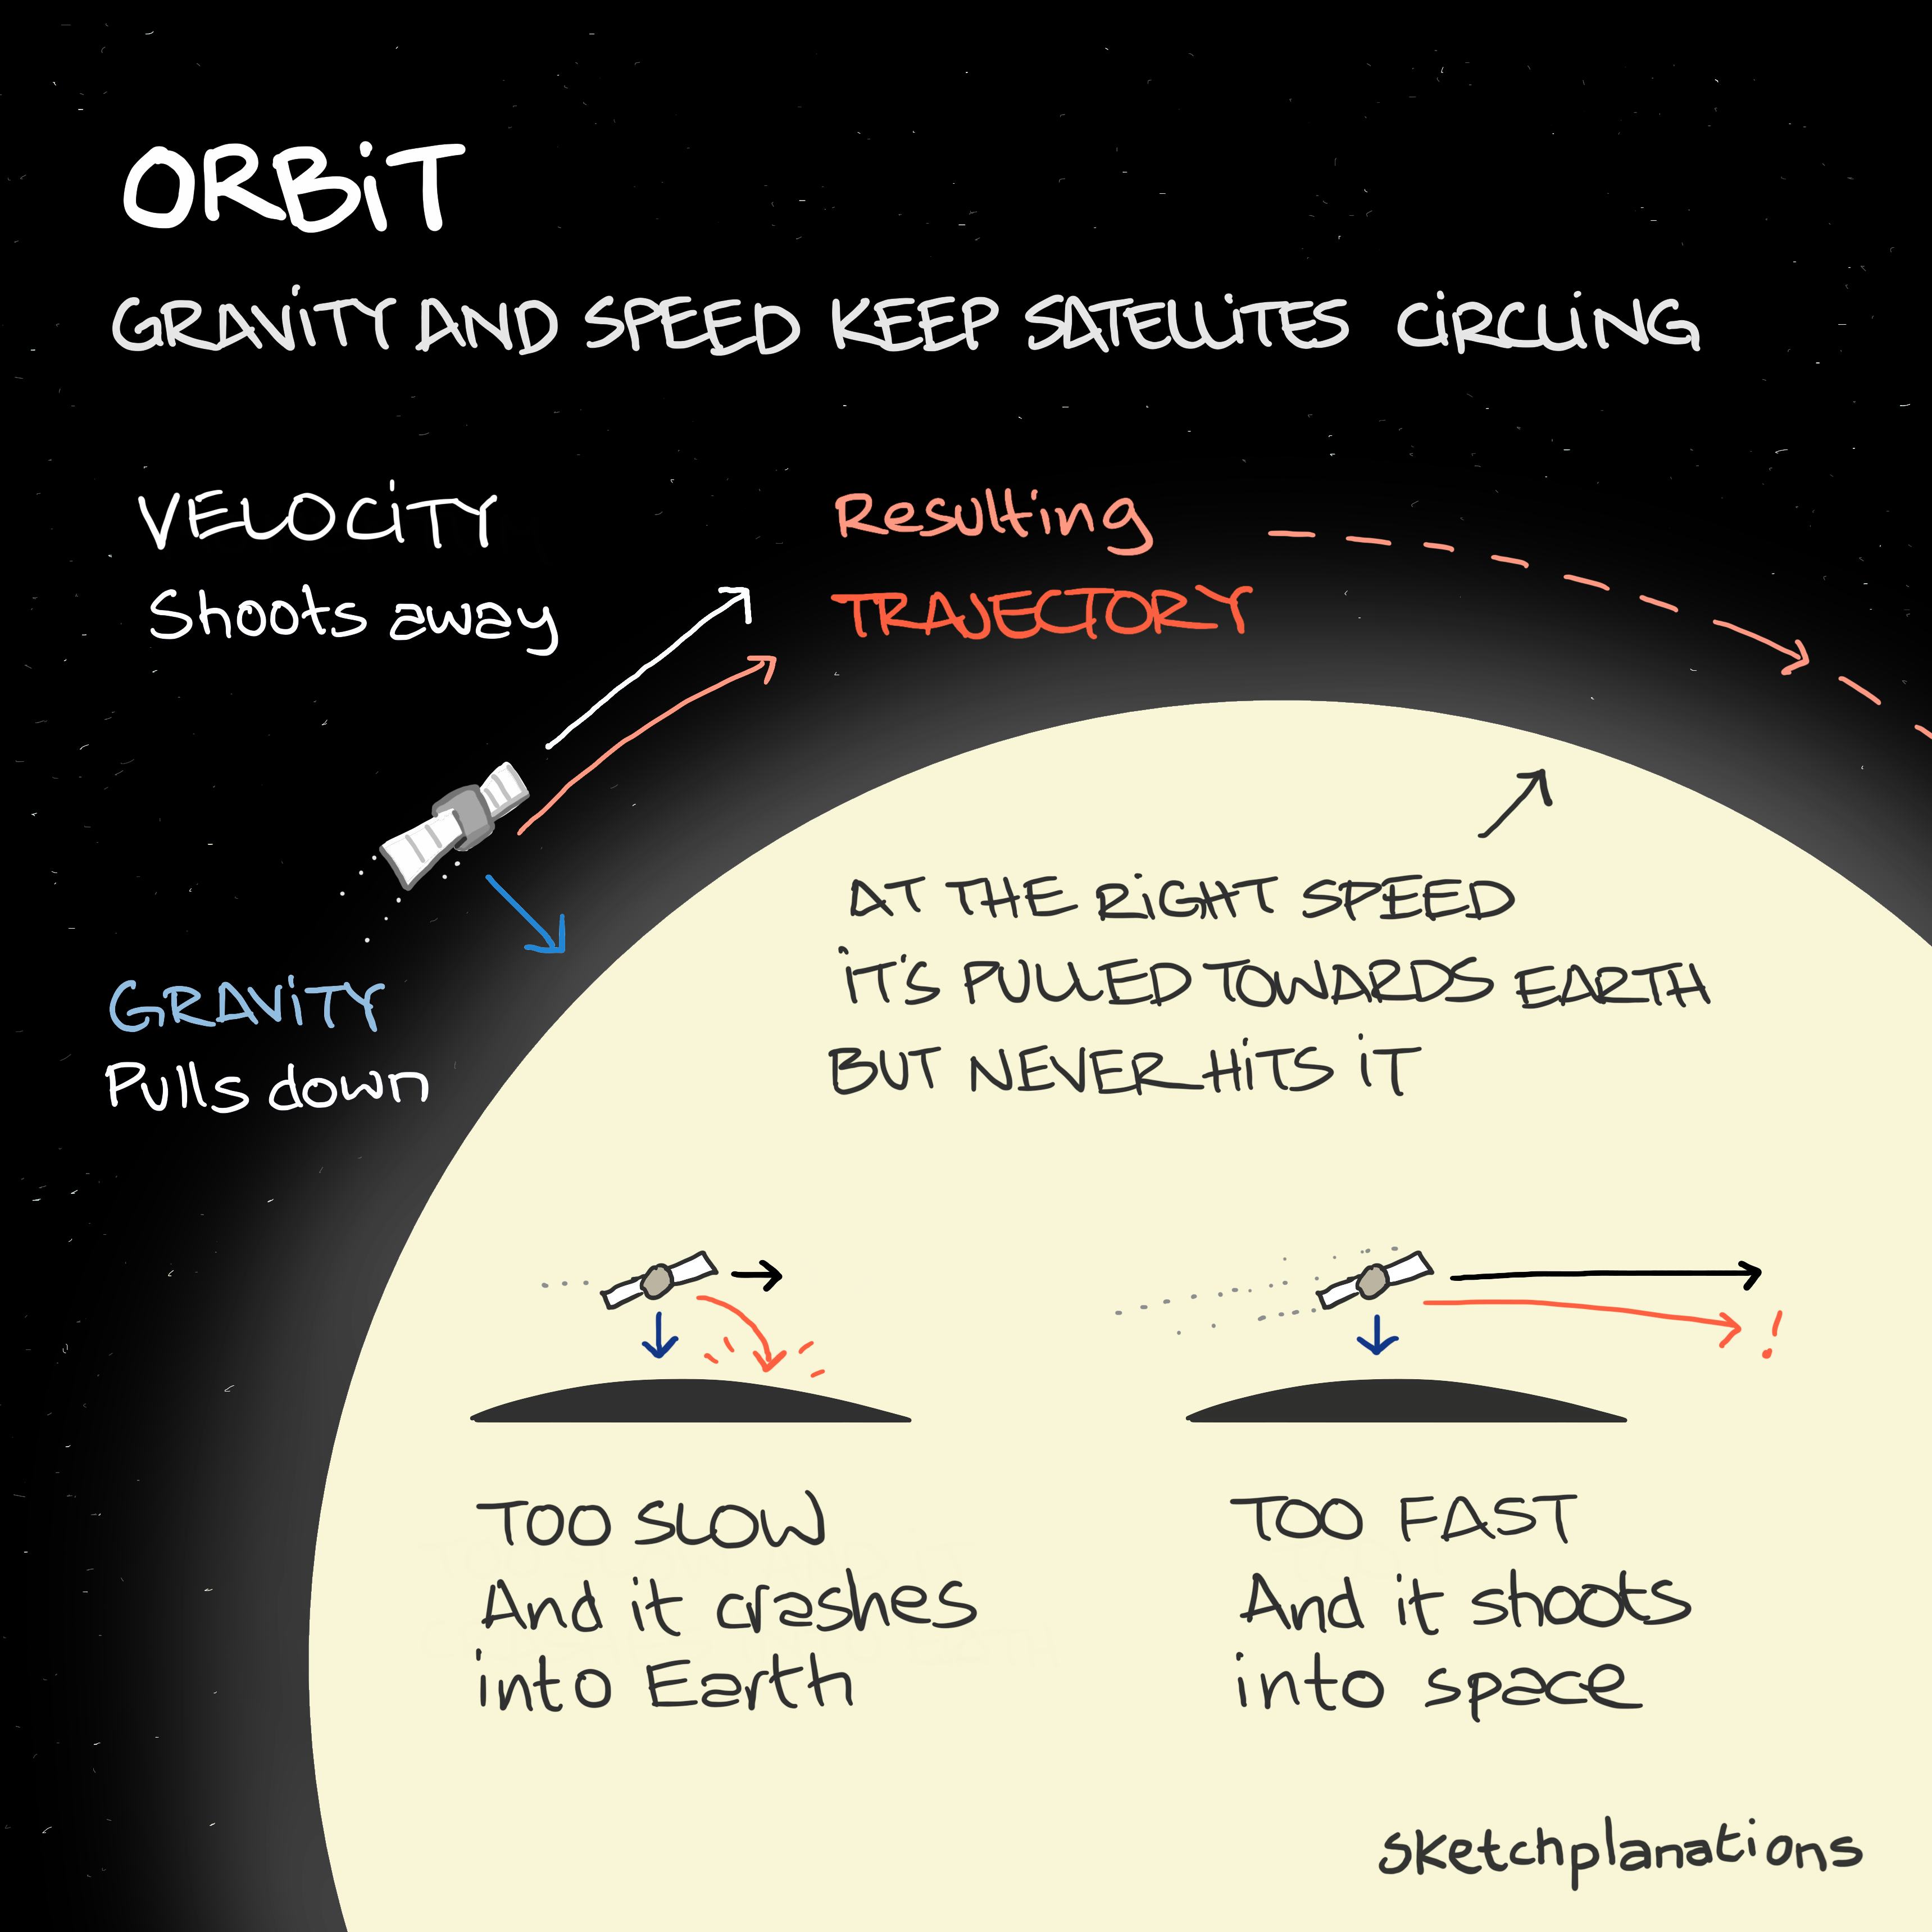 Orbit illustration: how a satellite stays in orbit - the balance between its velocity and gravity pulling it towards Earth